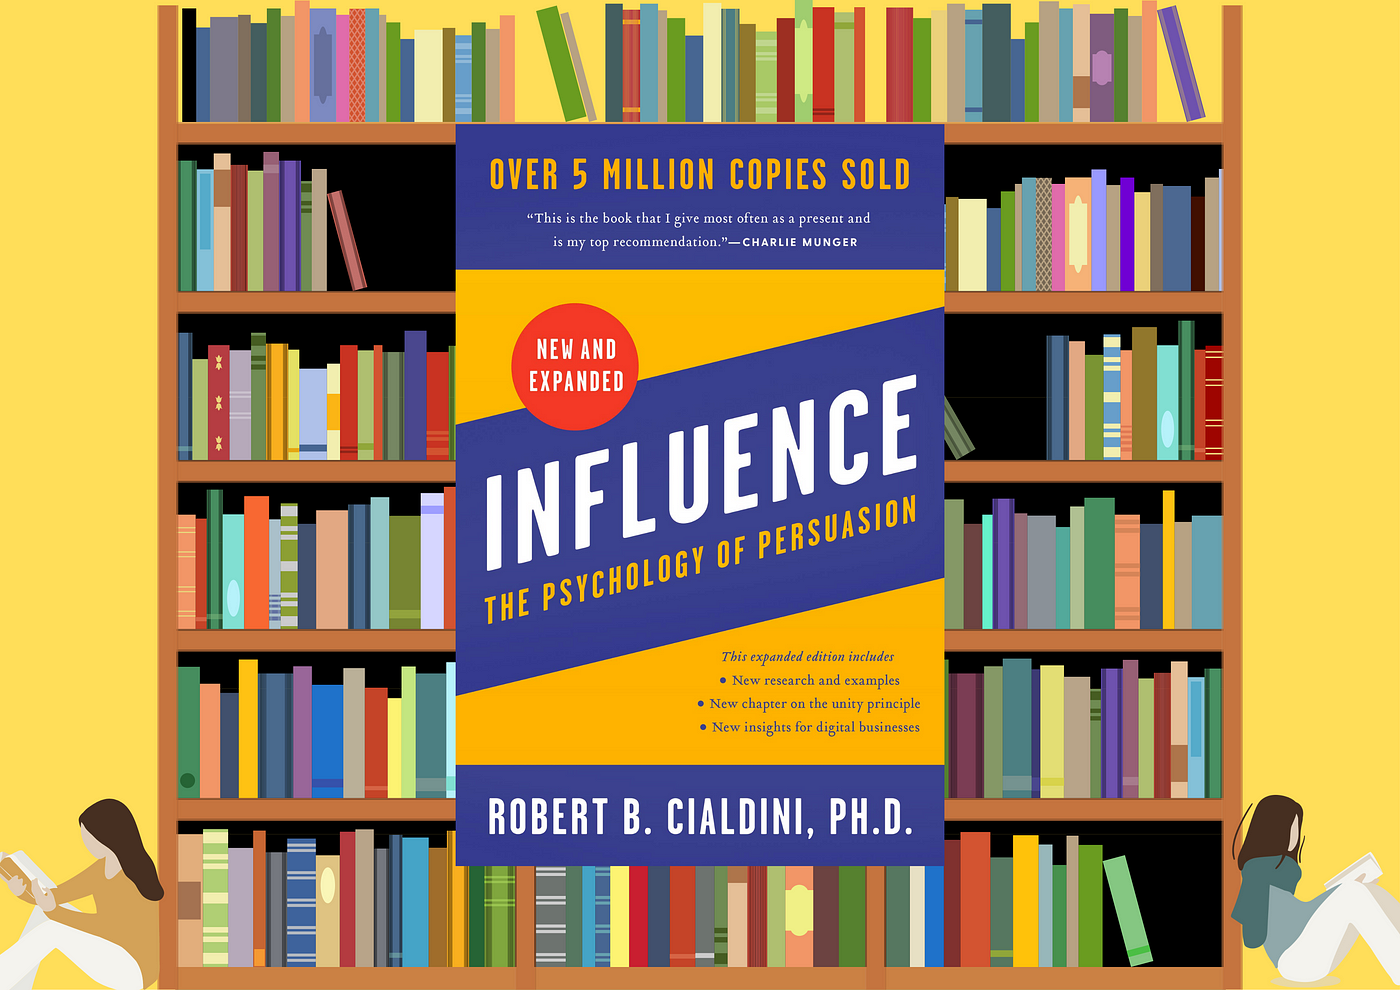 8 things you might not know about Robert Cialdini - BRAND MINDS